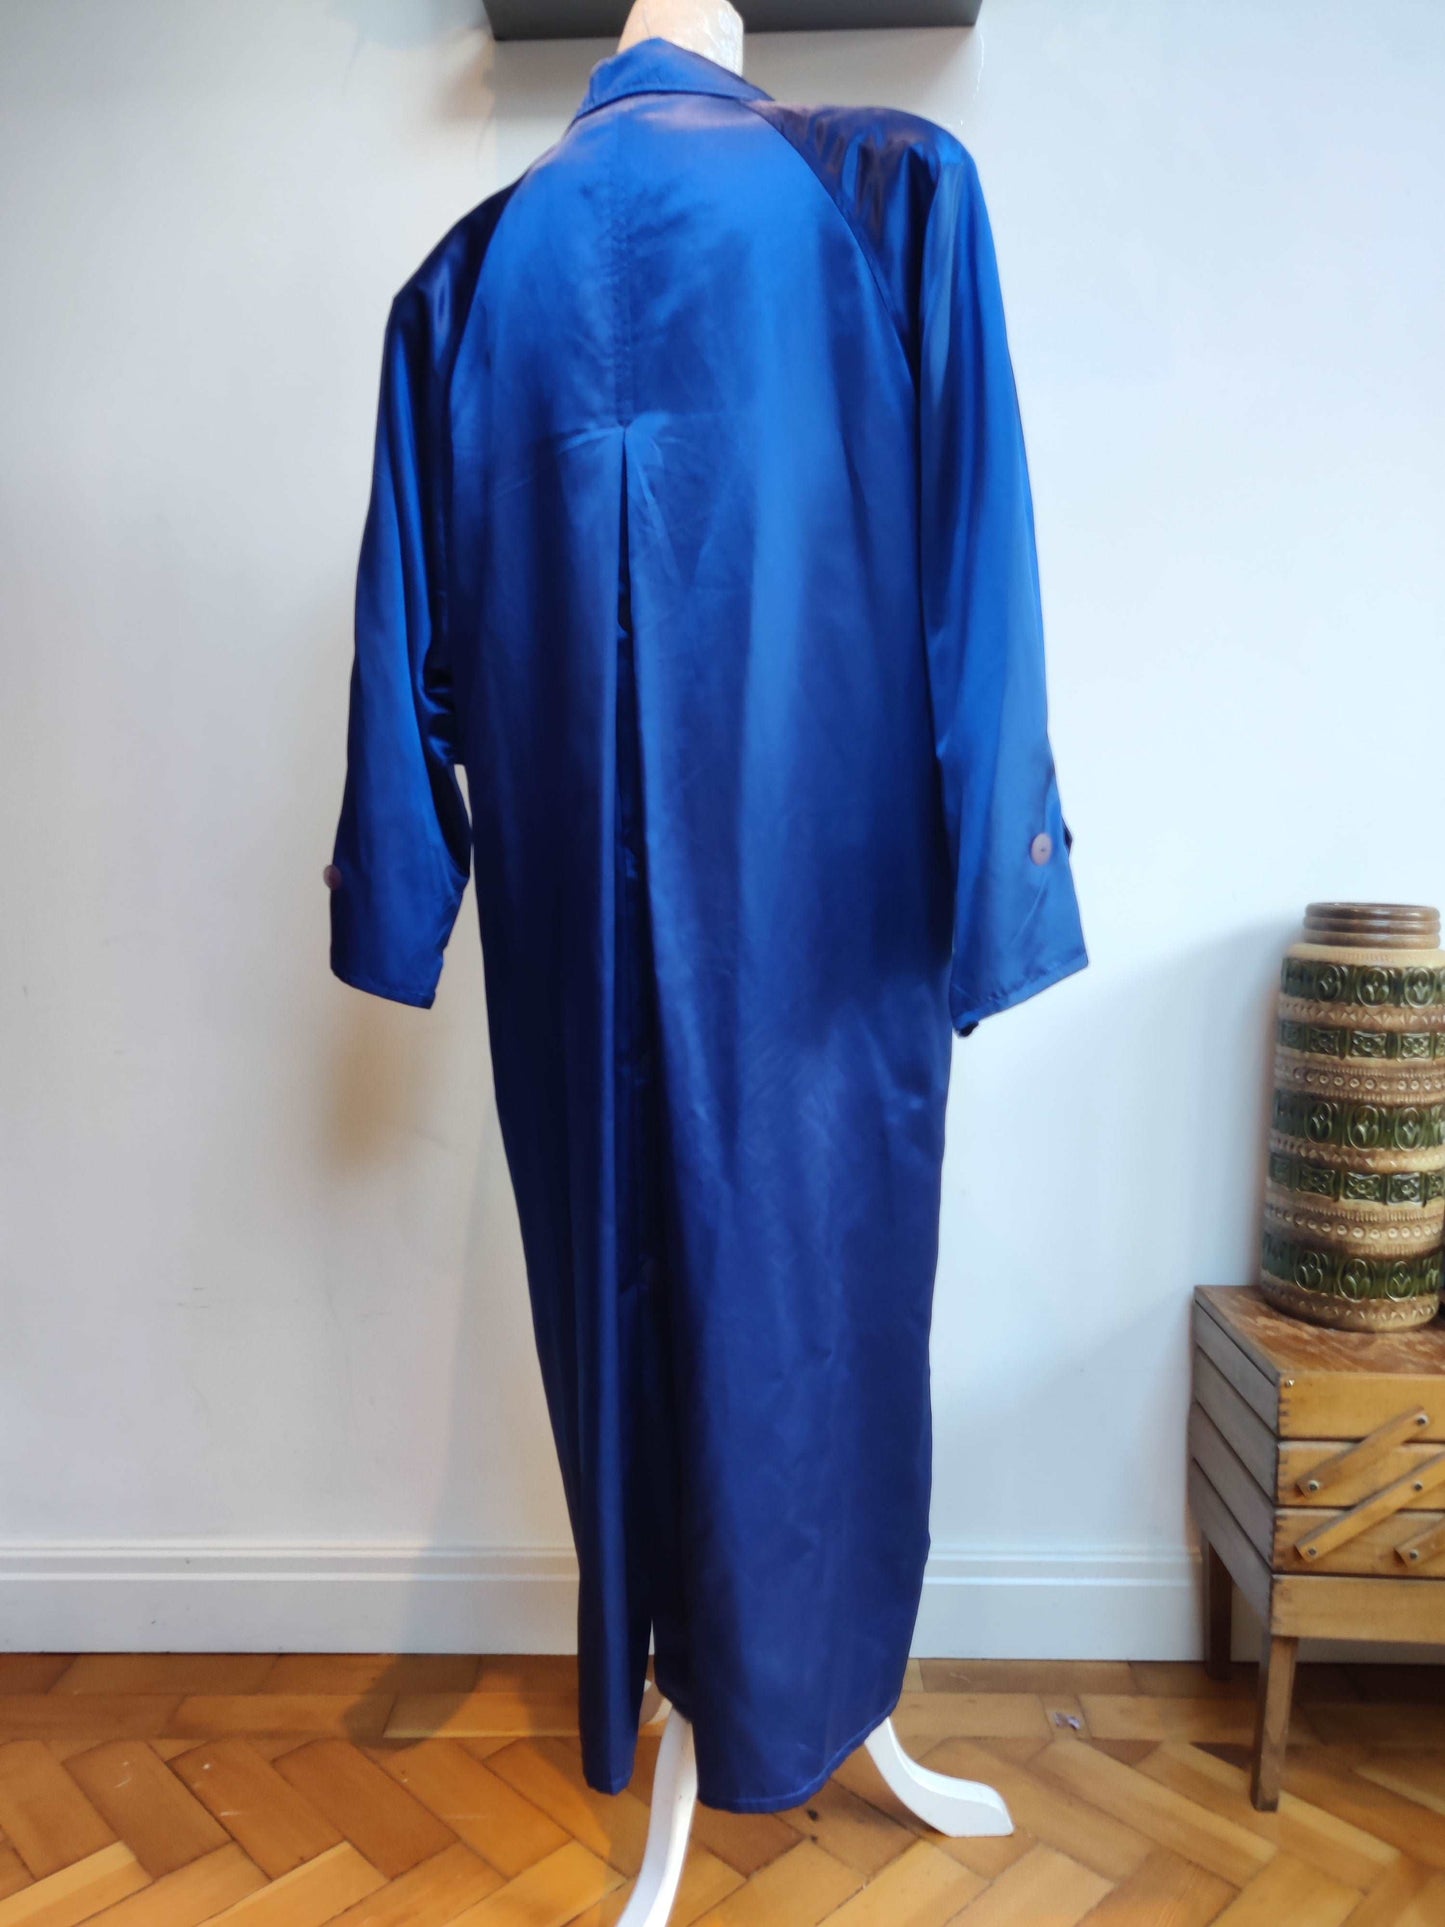 beautifully bright blue vintage coat with shoulder pads